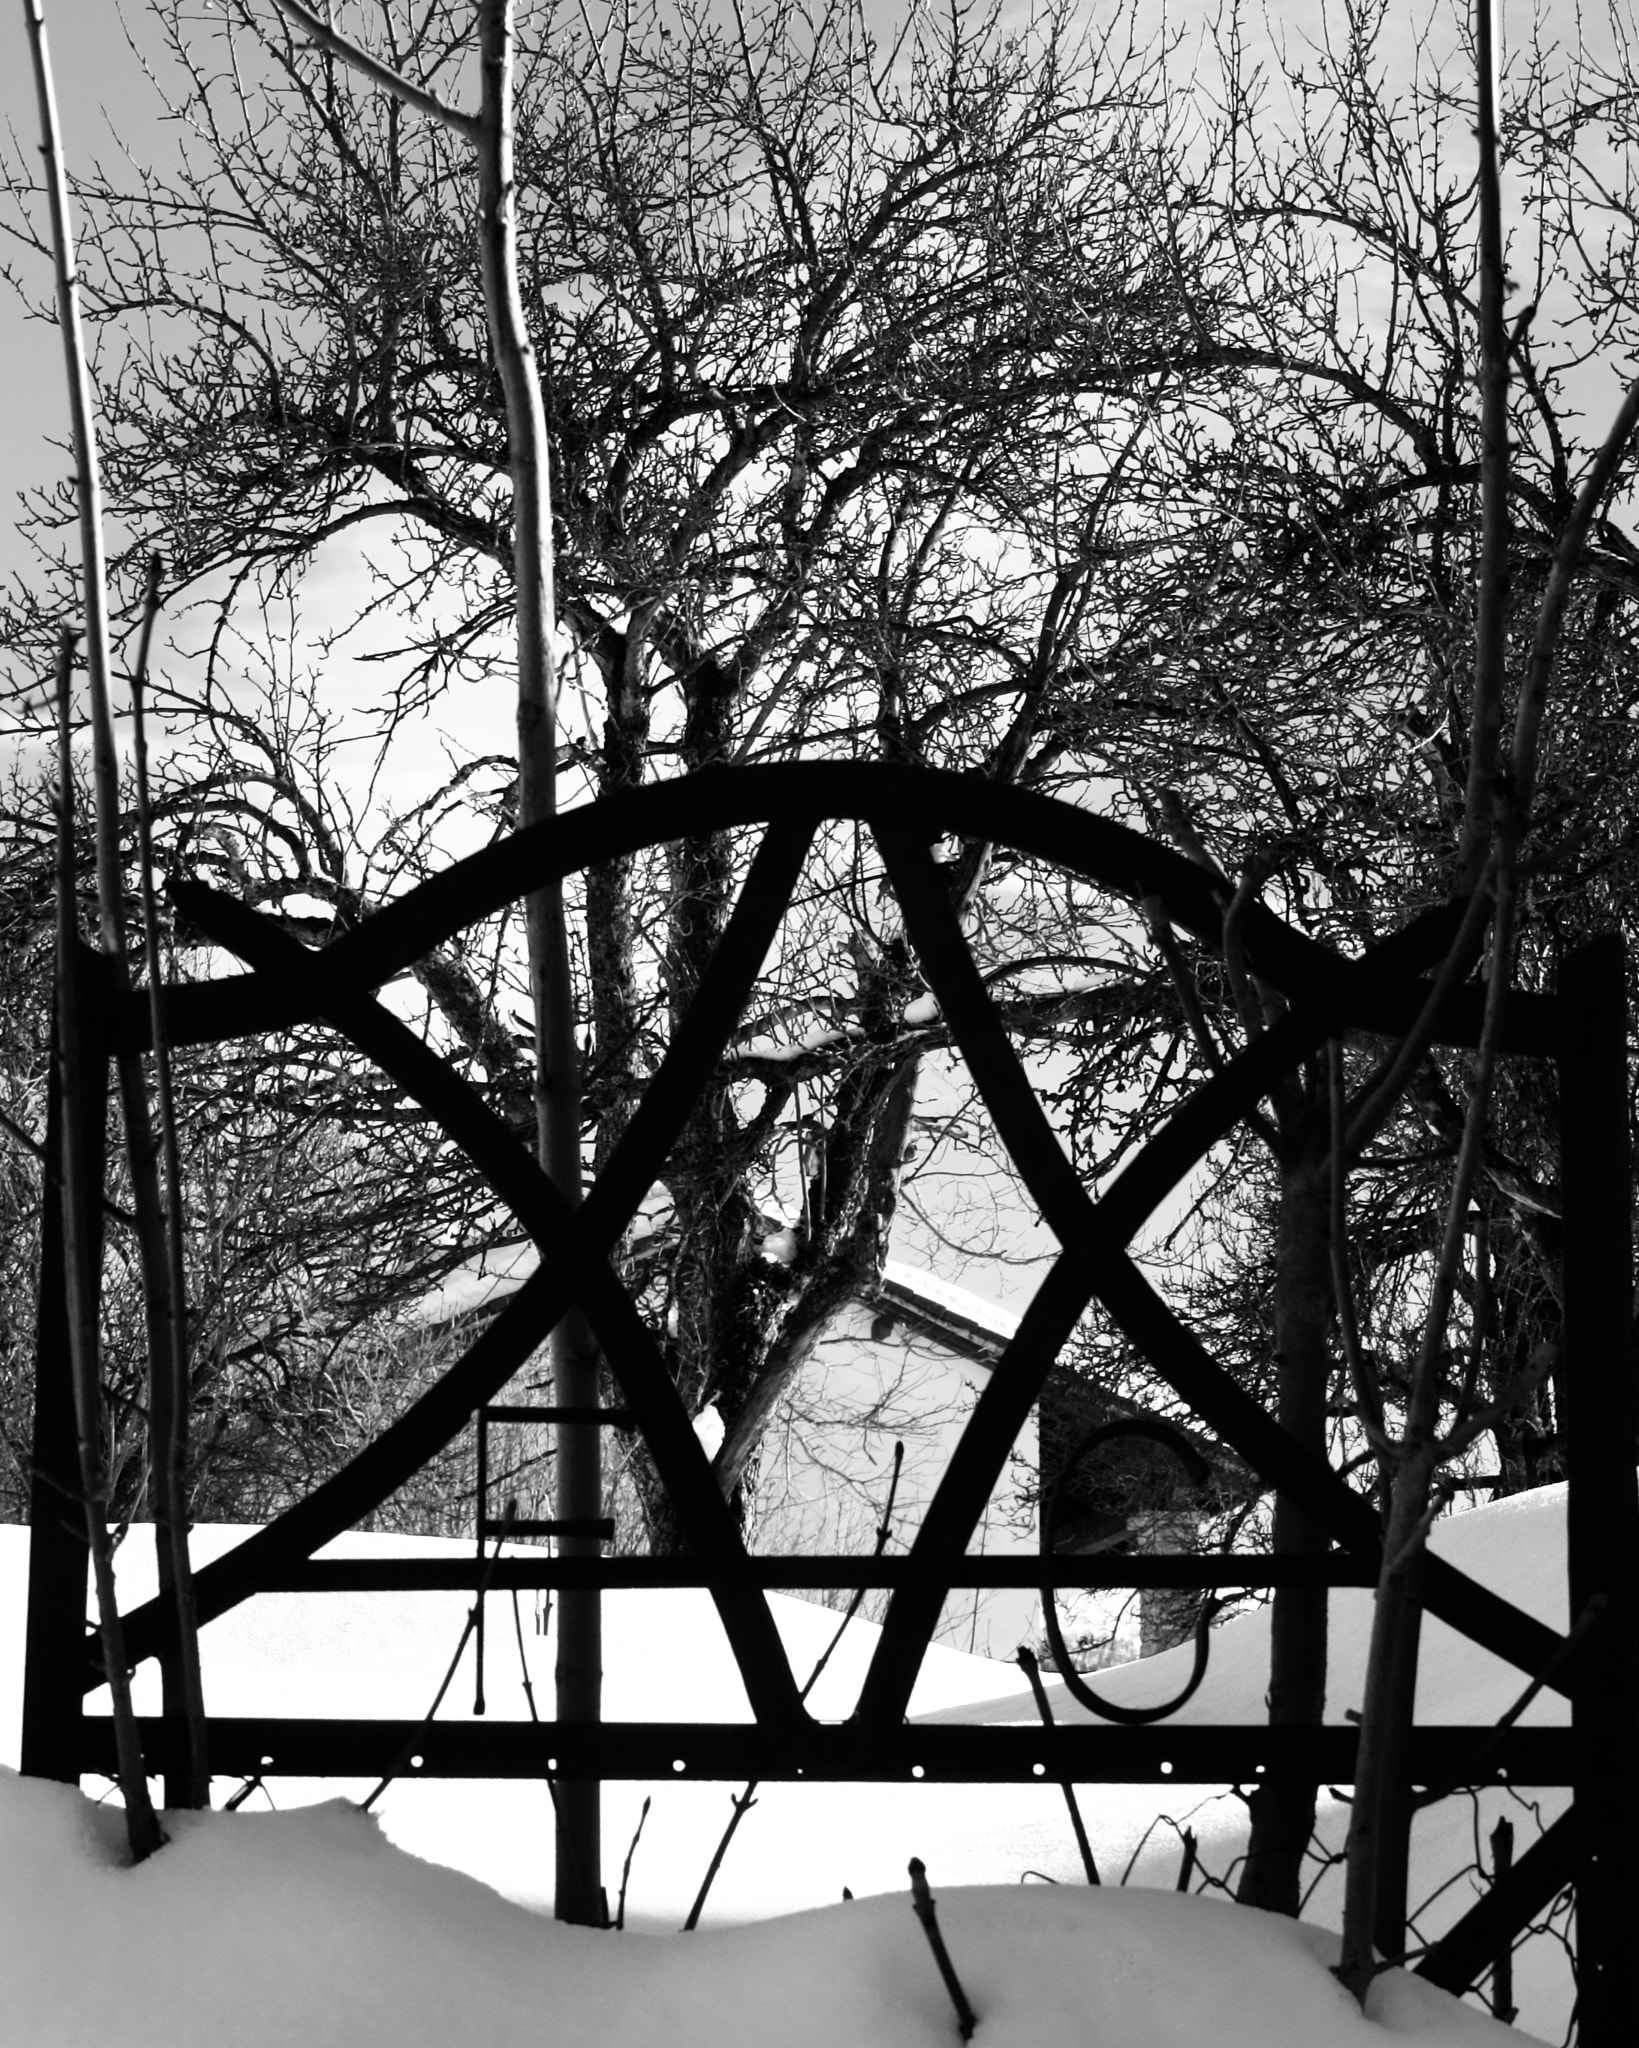 Canon XC10 sample photo. Gate to the snow photography